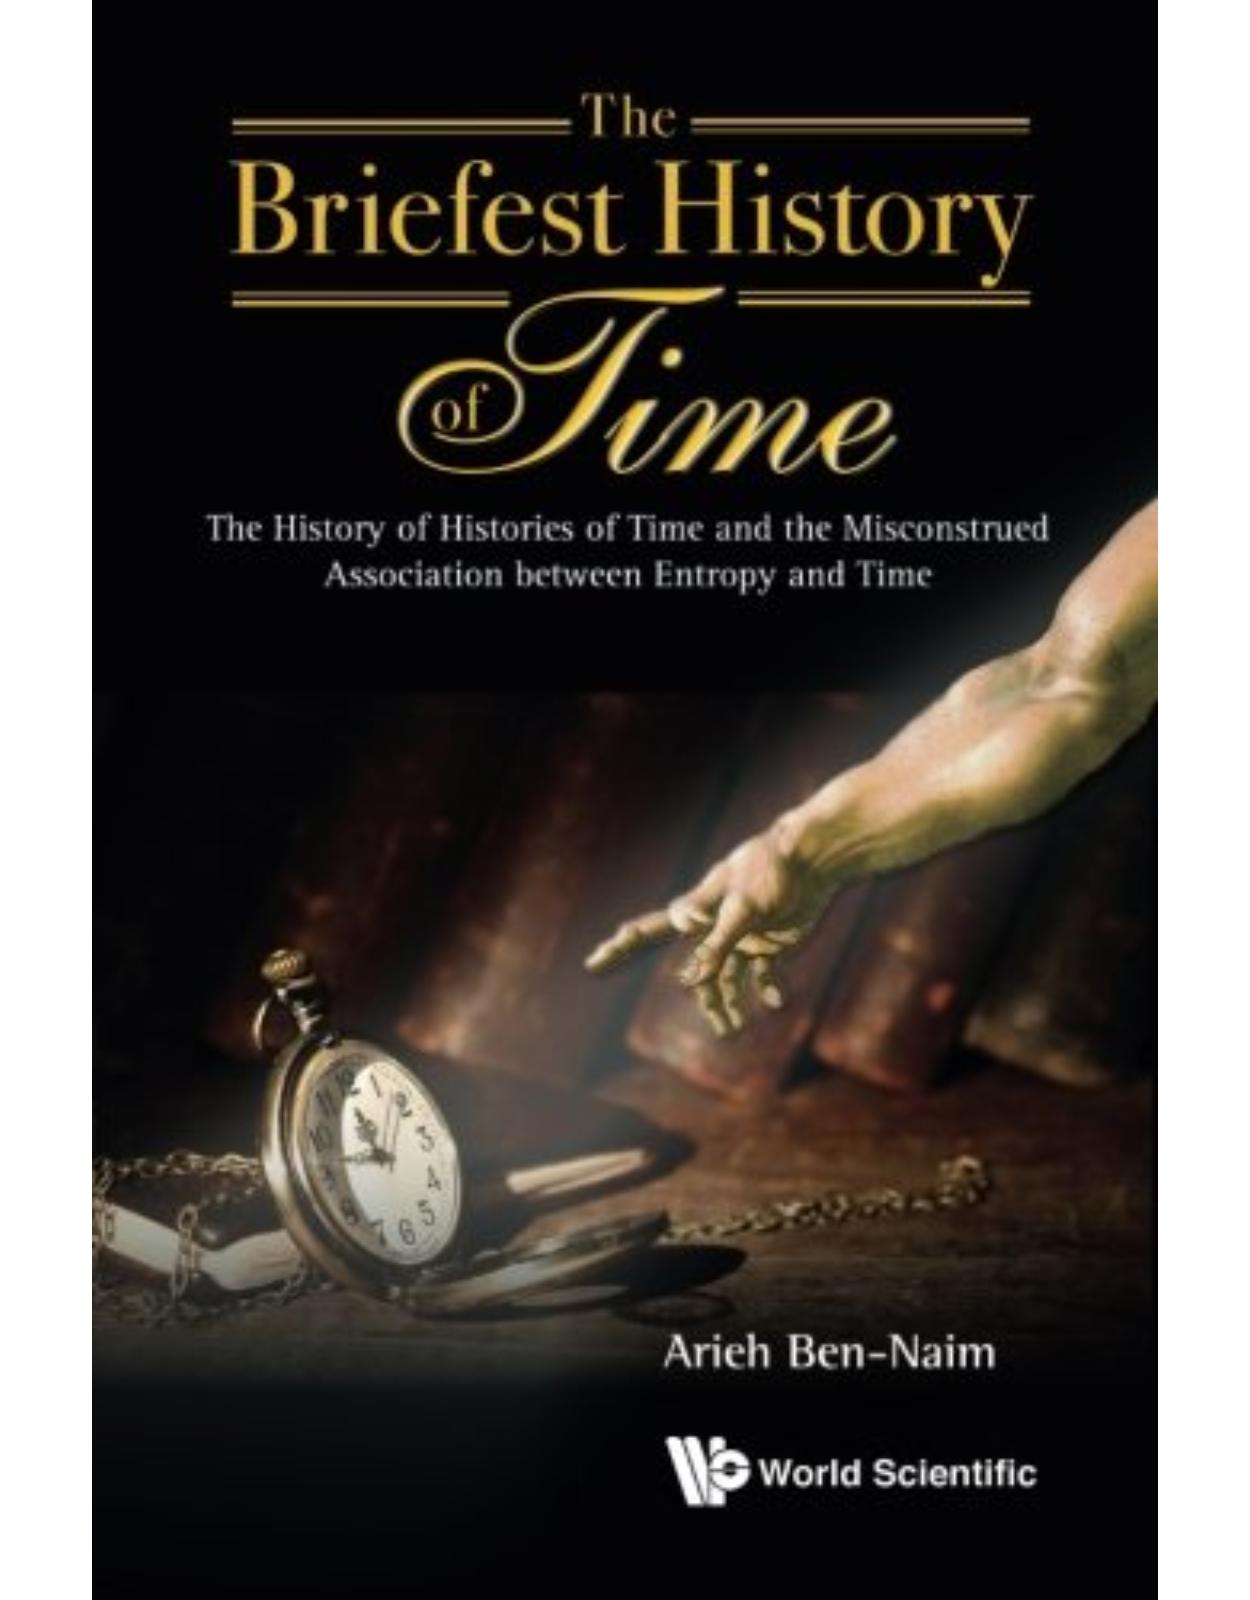 The Briefest History of Time: The History of Histories of Time and the Misconstrued Association between Entropy and Time